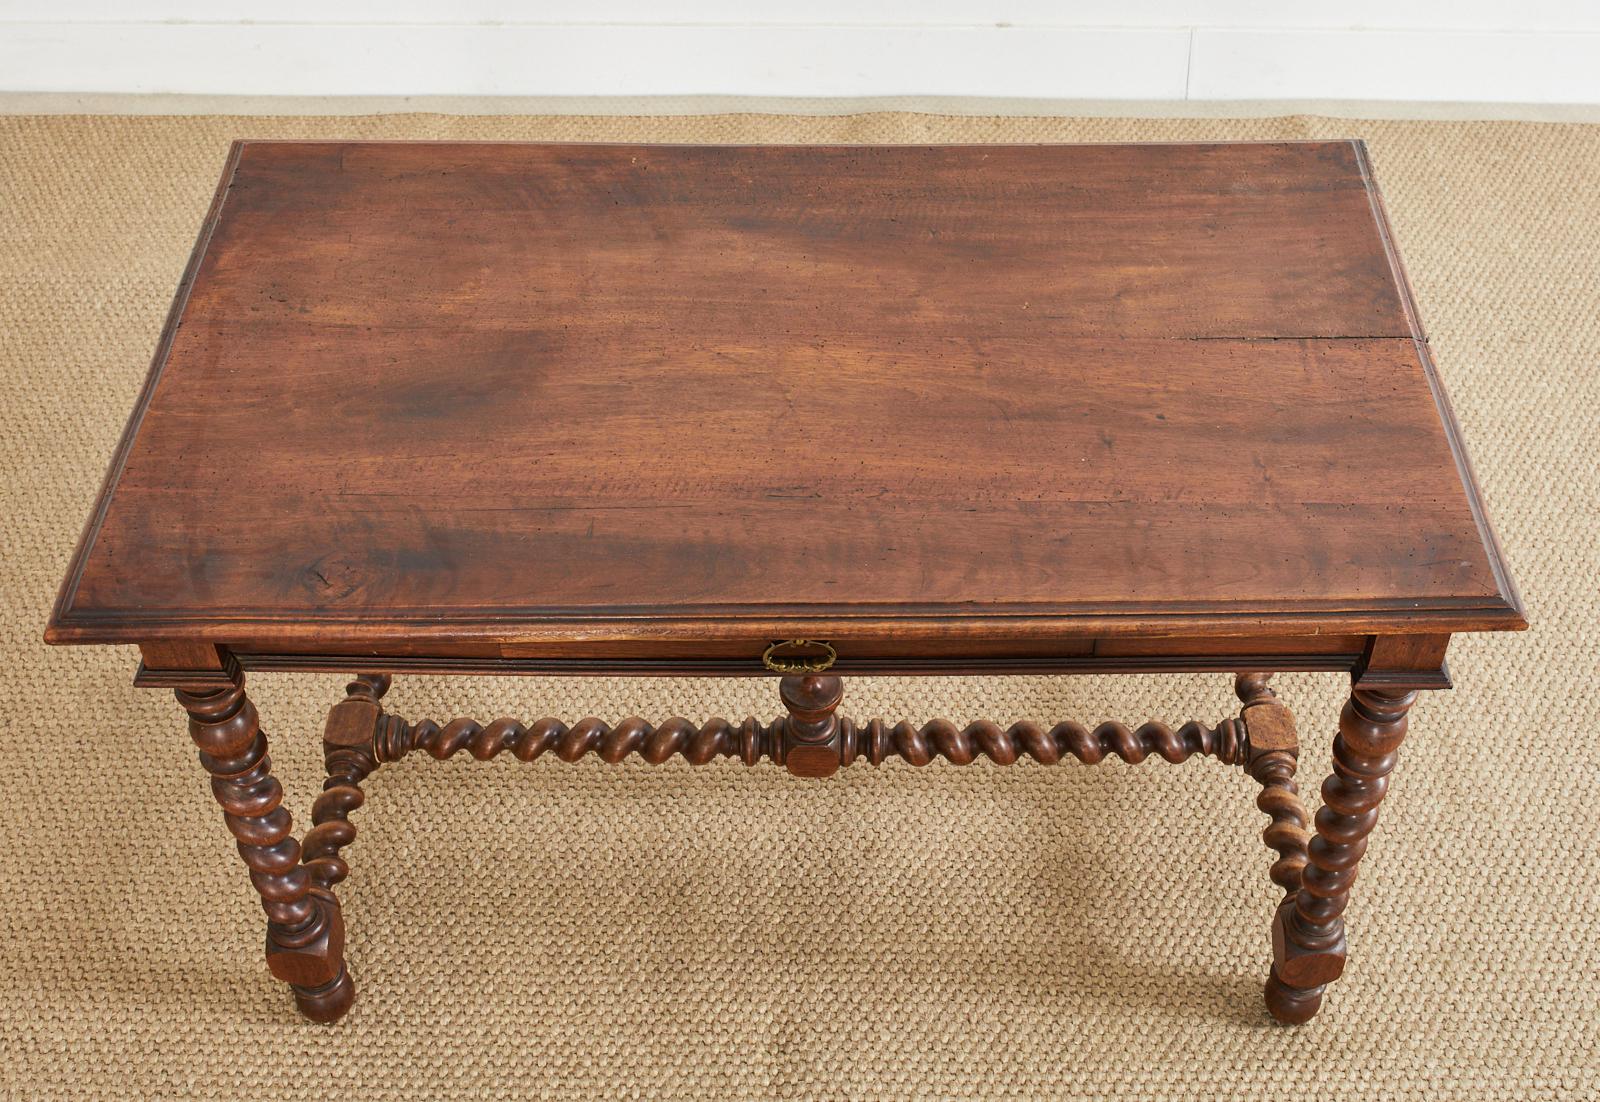 Hand-Crafted 19th Century Louis XIII Style Walnut Barley Twist Library Table